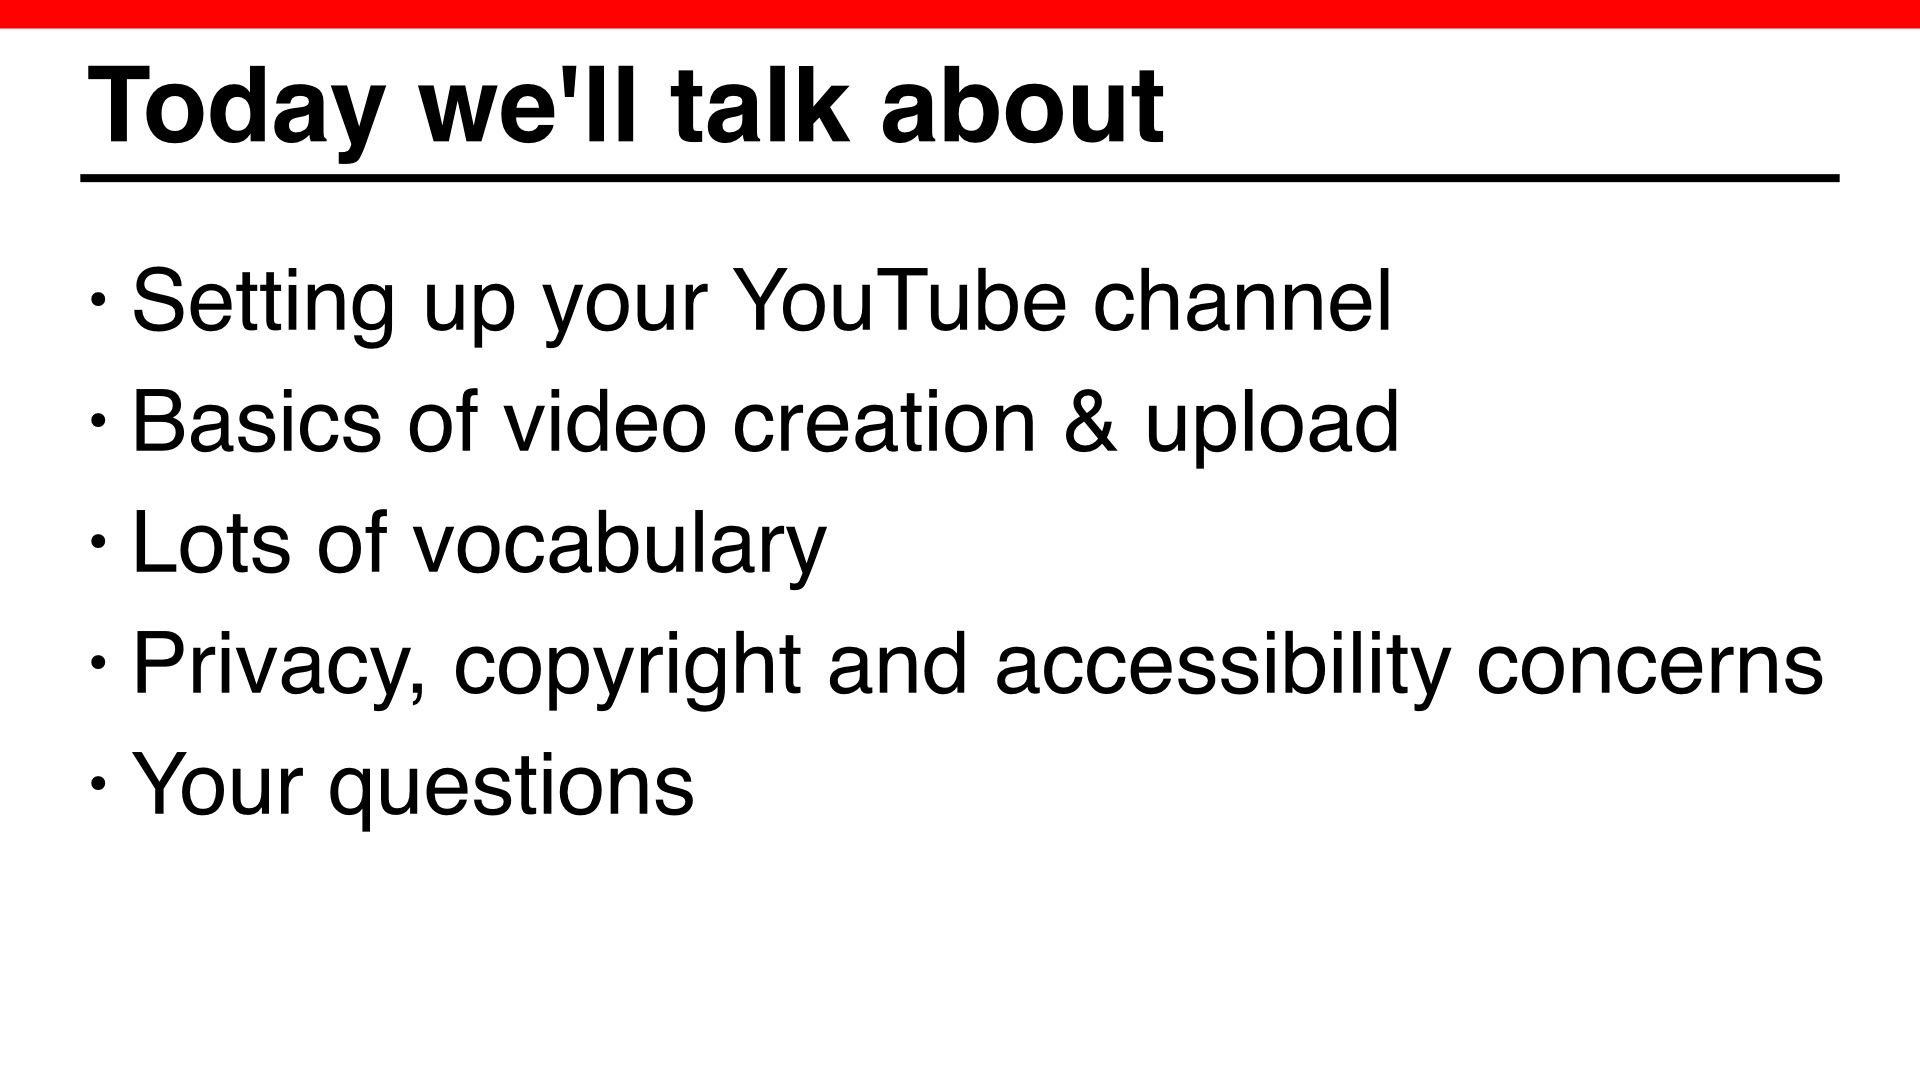 Today we'll talk about
- Setting up your YouTube channel
- Basics of video creation & upload
- Lots of vocabulary
- Privacy, copyright and accessibility concerns - Your questions